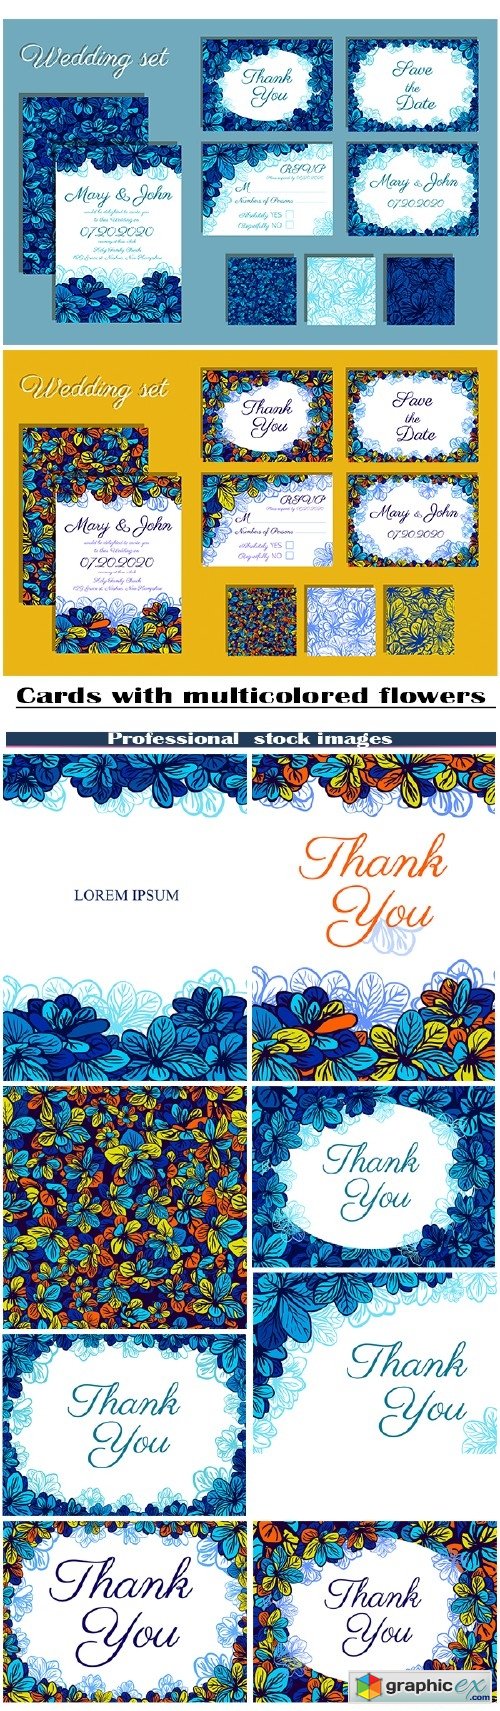 Cards with multicolored flowers